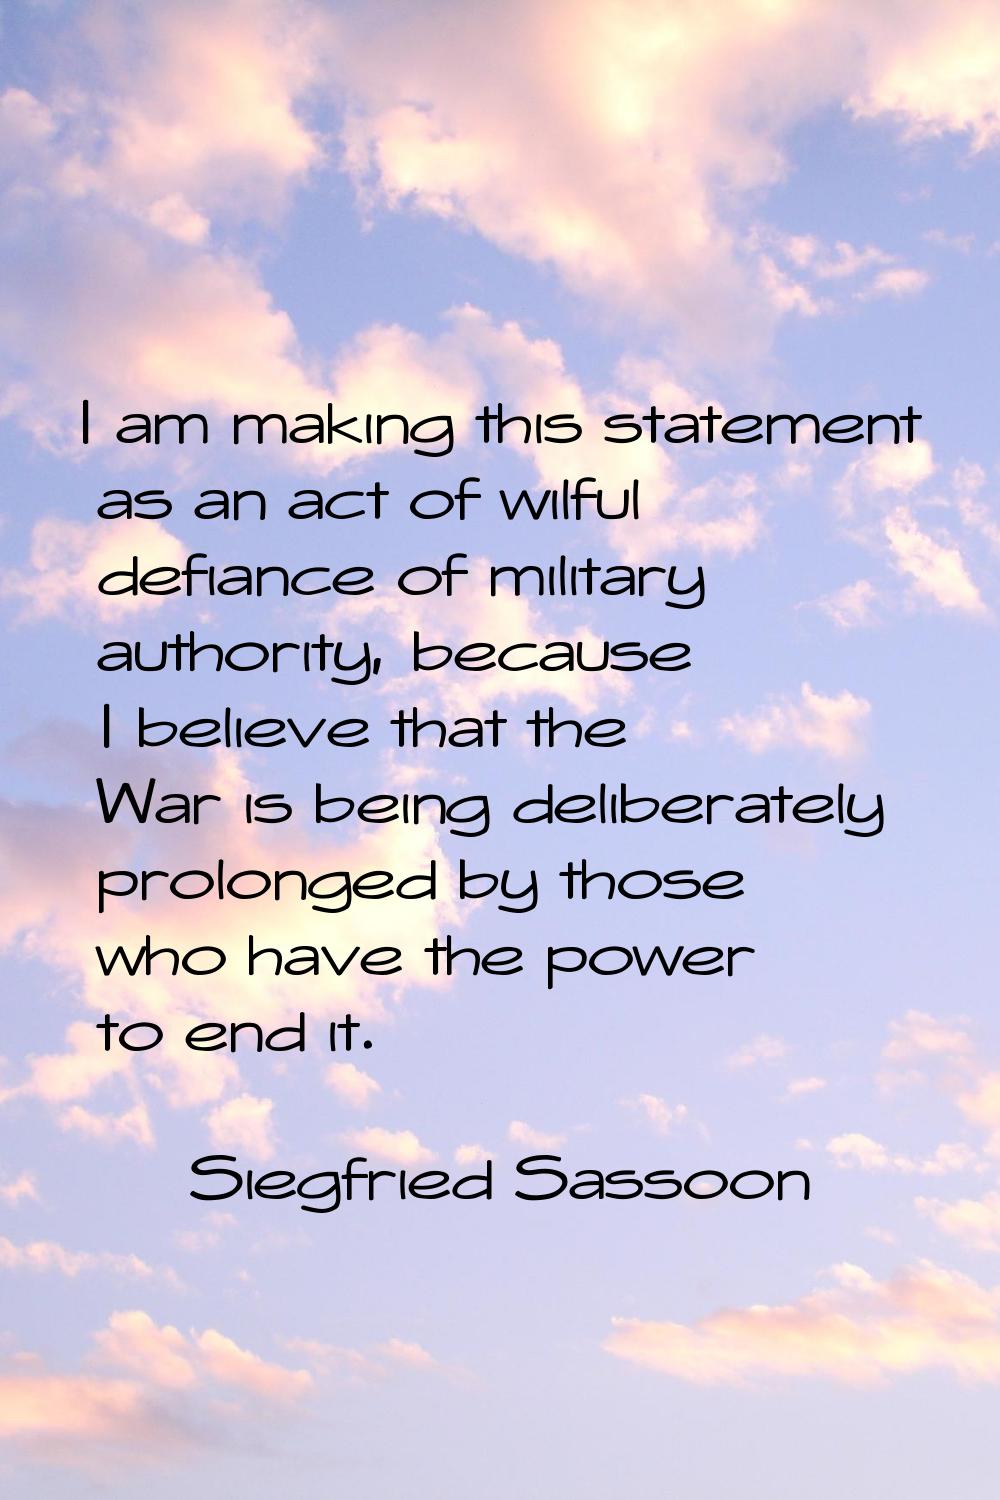 I am making this statement as an act of wilful defiance of military authority, because I believe th